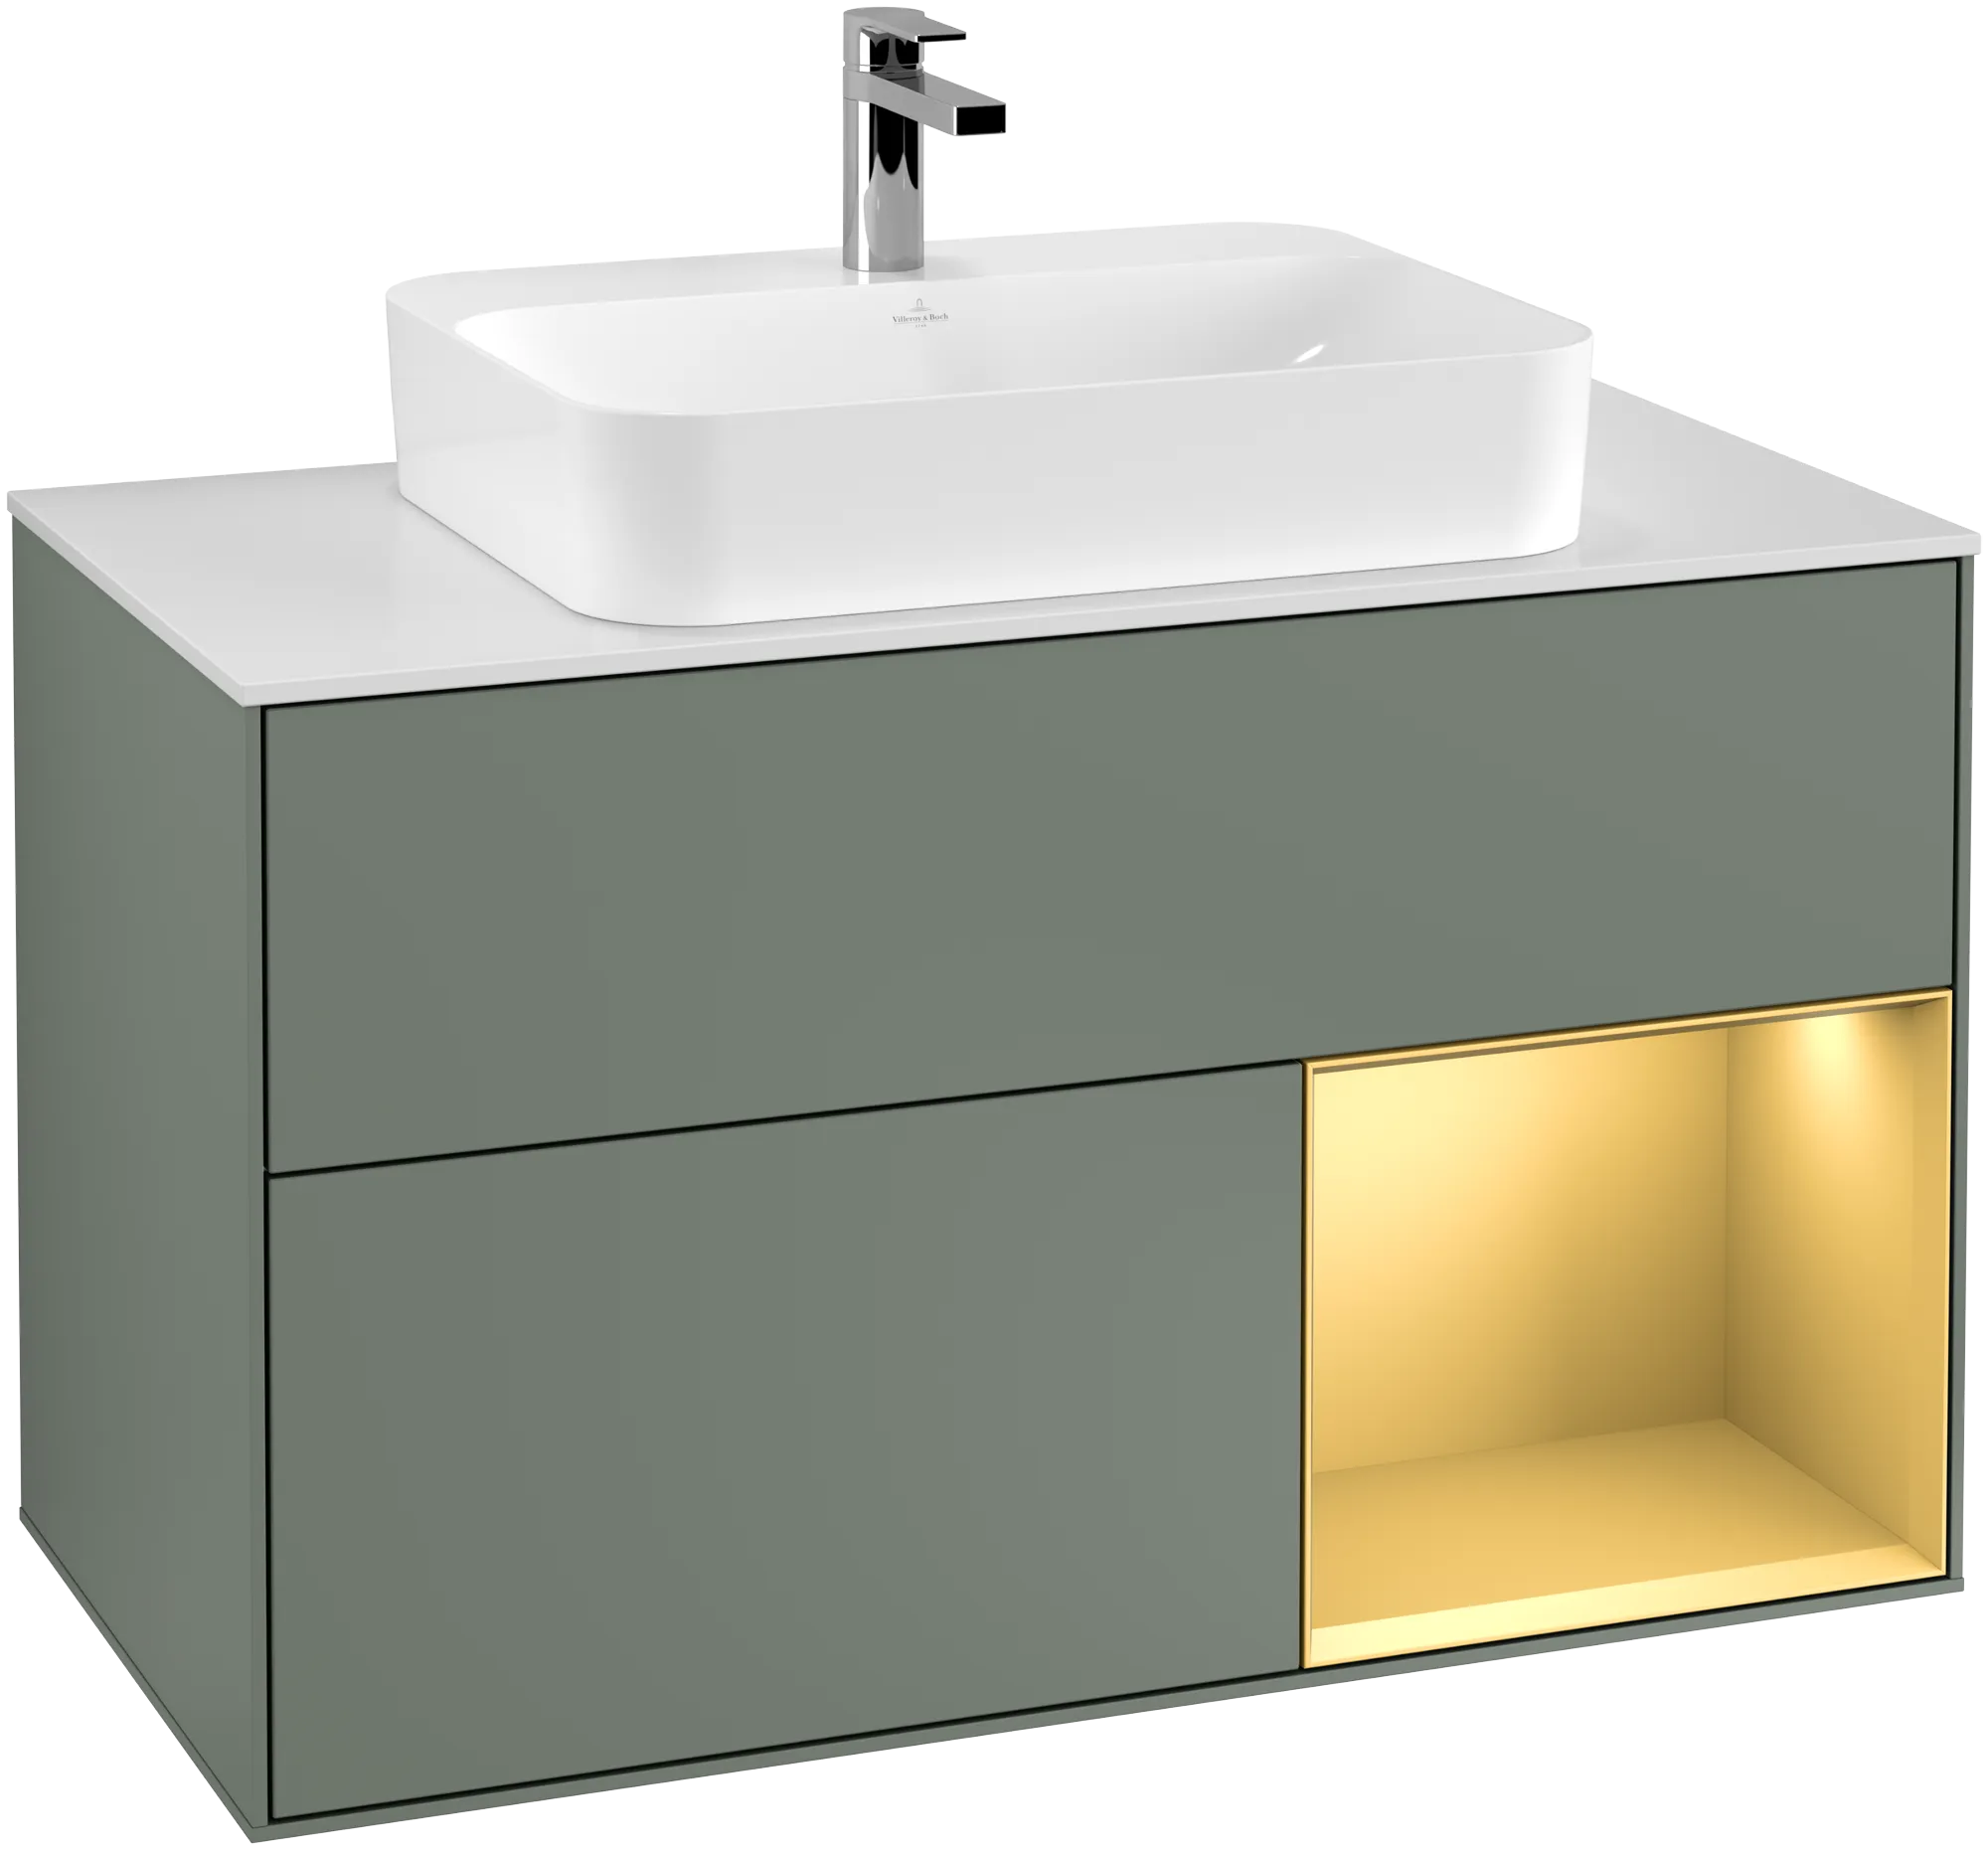 Picture of VILLEROY BOCH Finion Vanity unit, with lighting, 2 pull-out compartments, 1000 x 603 x 501 mm, Olive Matt Lacquer / Gold Matt Lacquer / Glass White Matt #G371HFGM